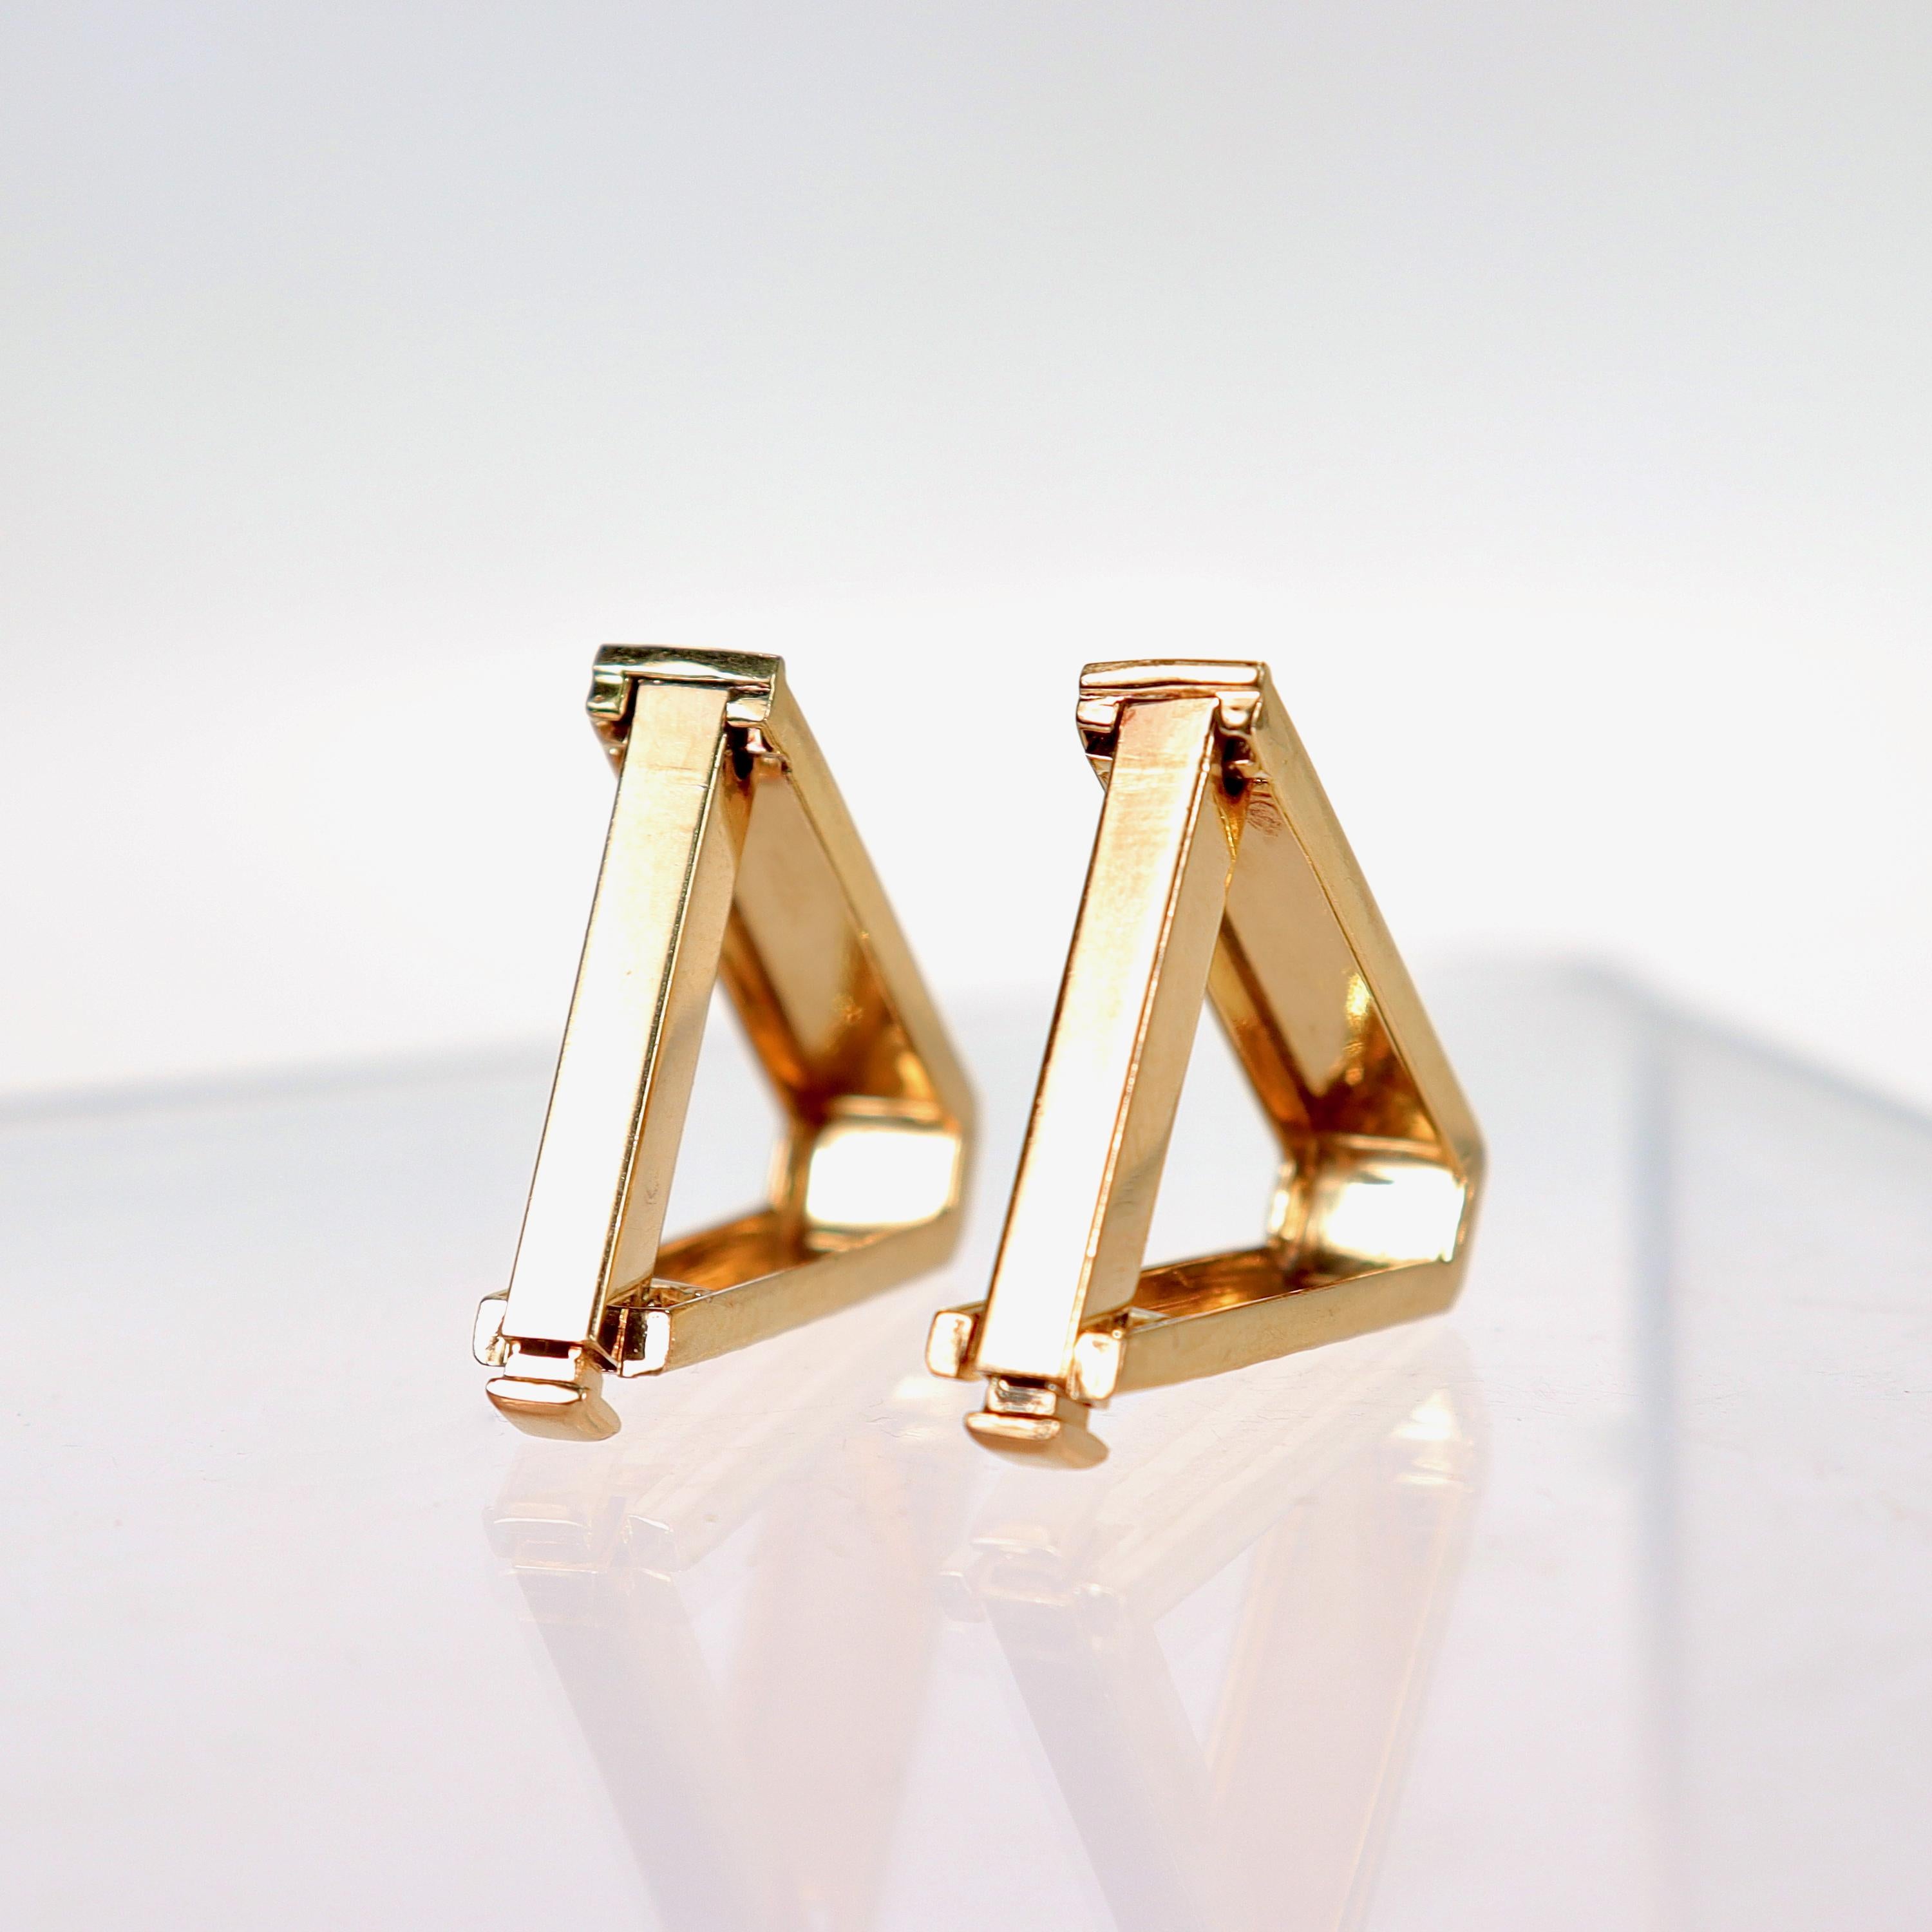 Signed 18 Karat French Gold Triangular or Wrapped Cufflinks For Sale 6